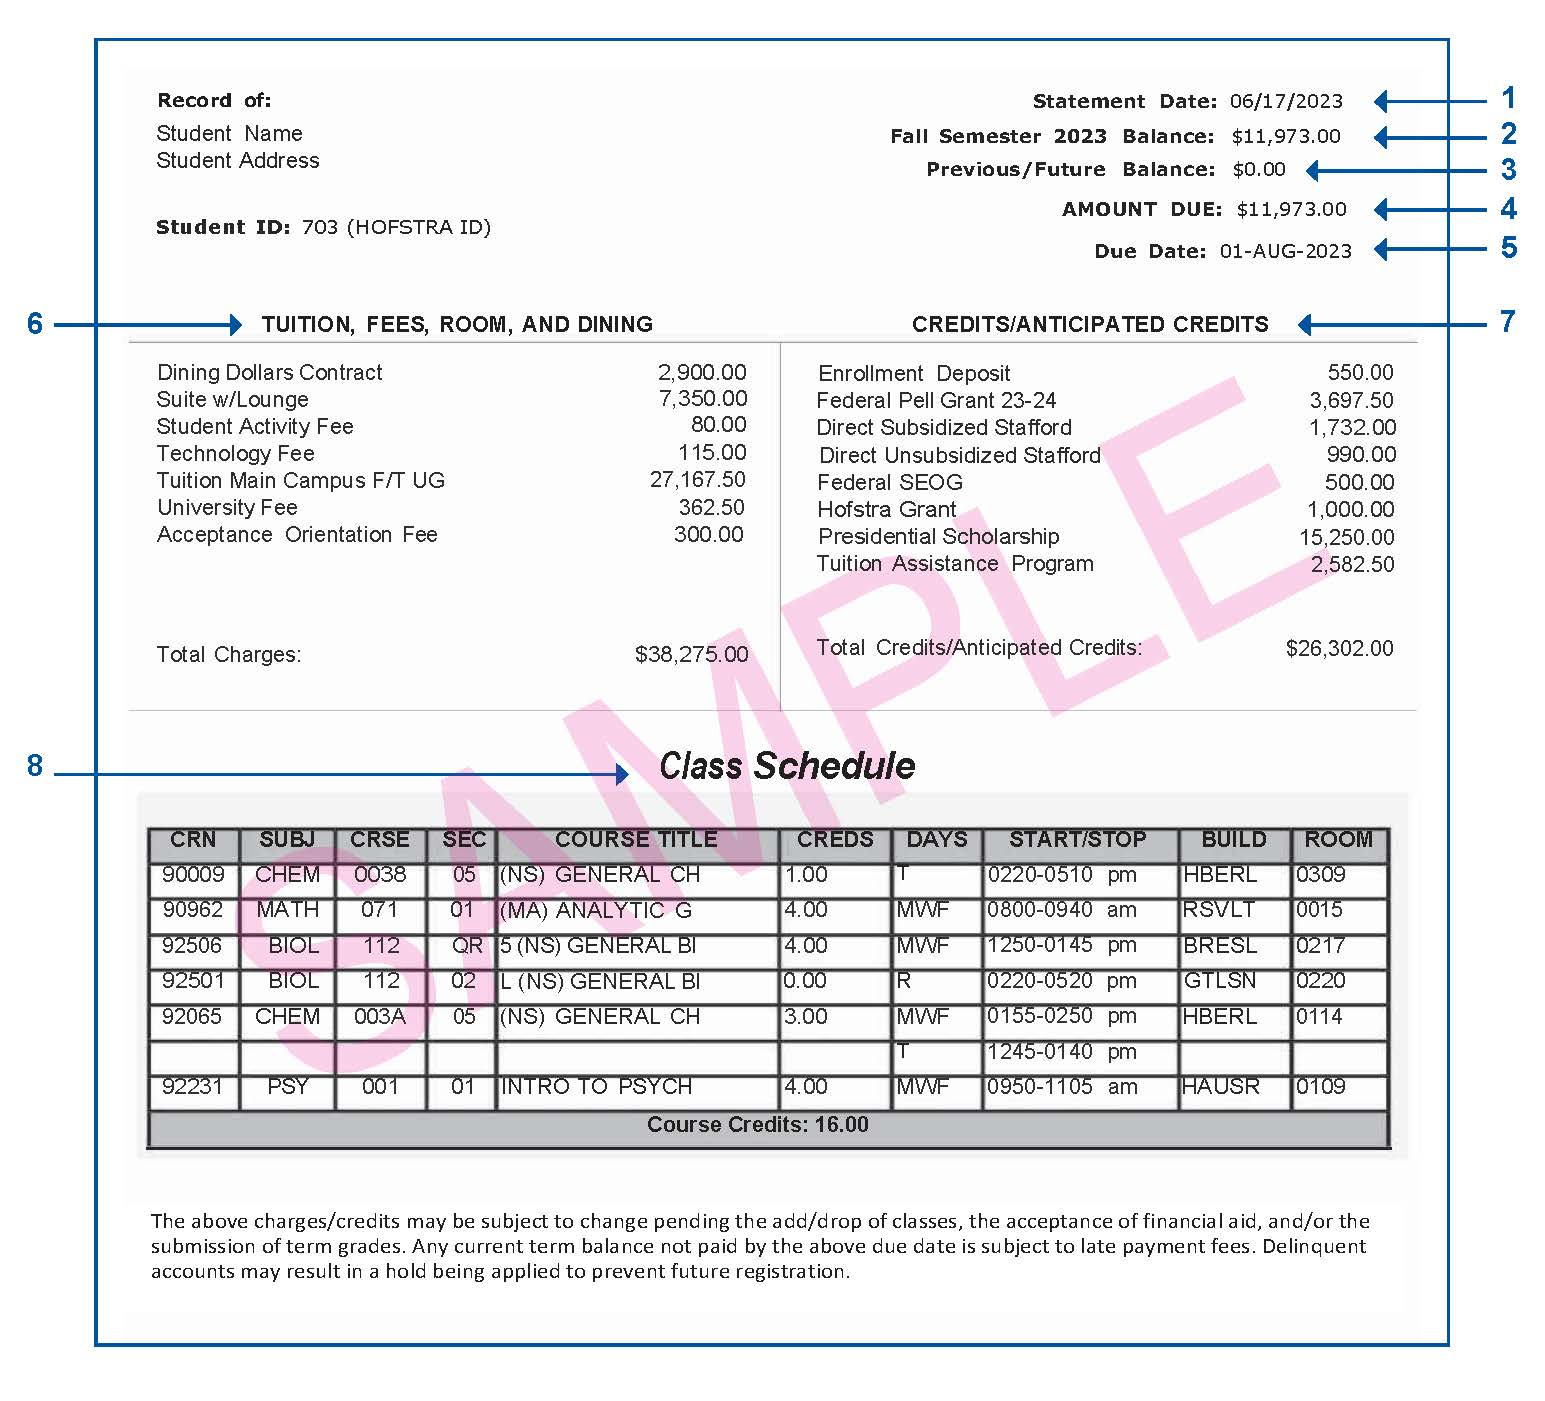 Billing Statement Sample - See Acompanying Text